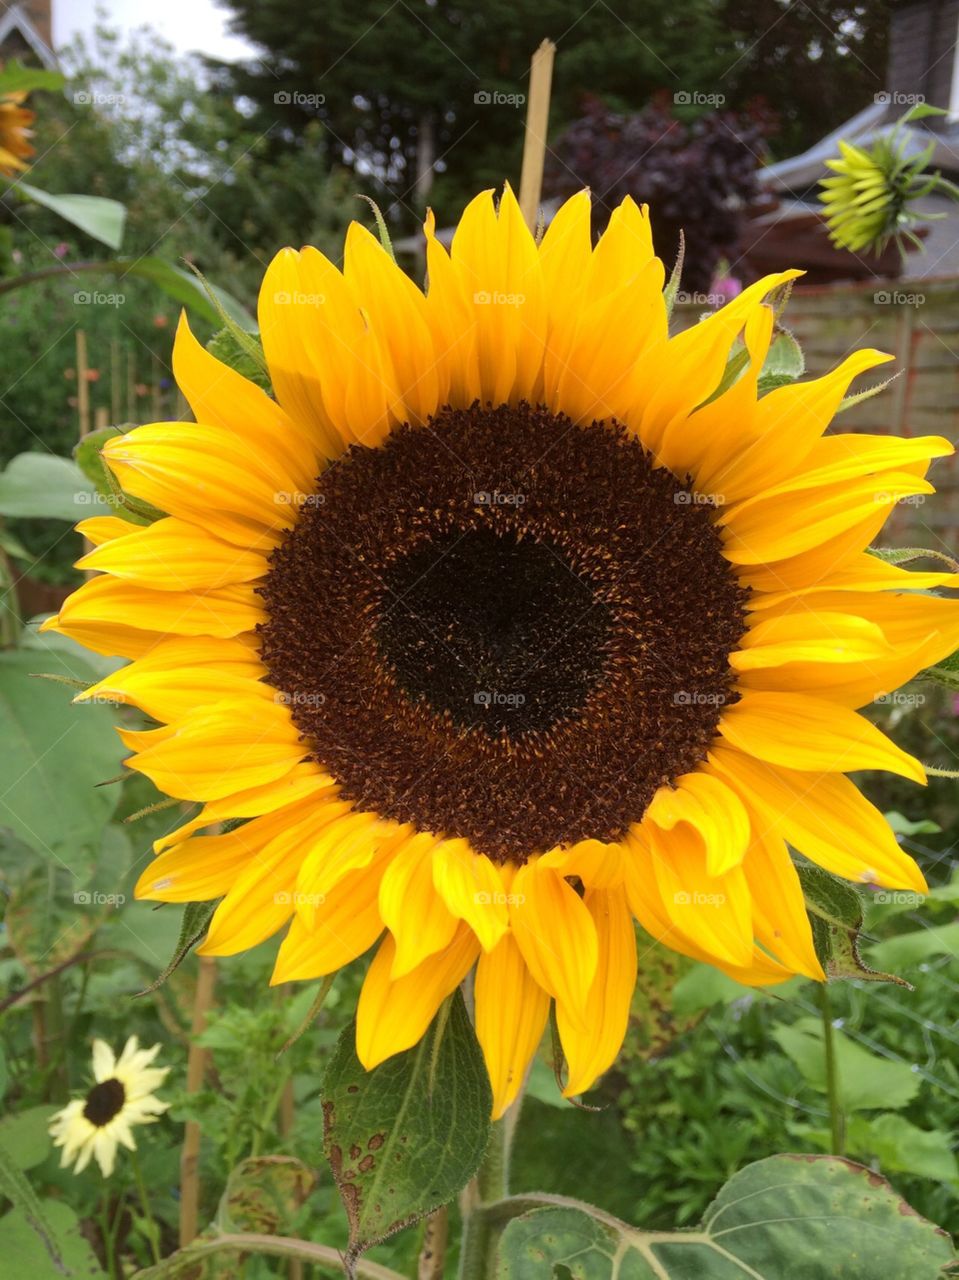 Sunflowers, cheerful, colourful, vibrant, yellow, summer flowers.